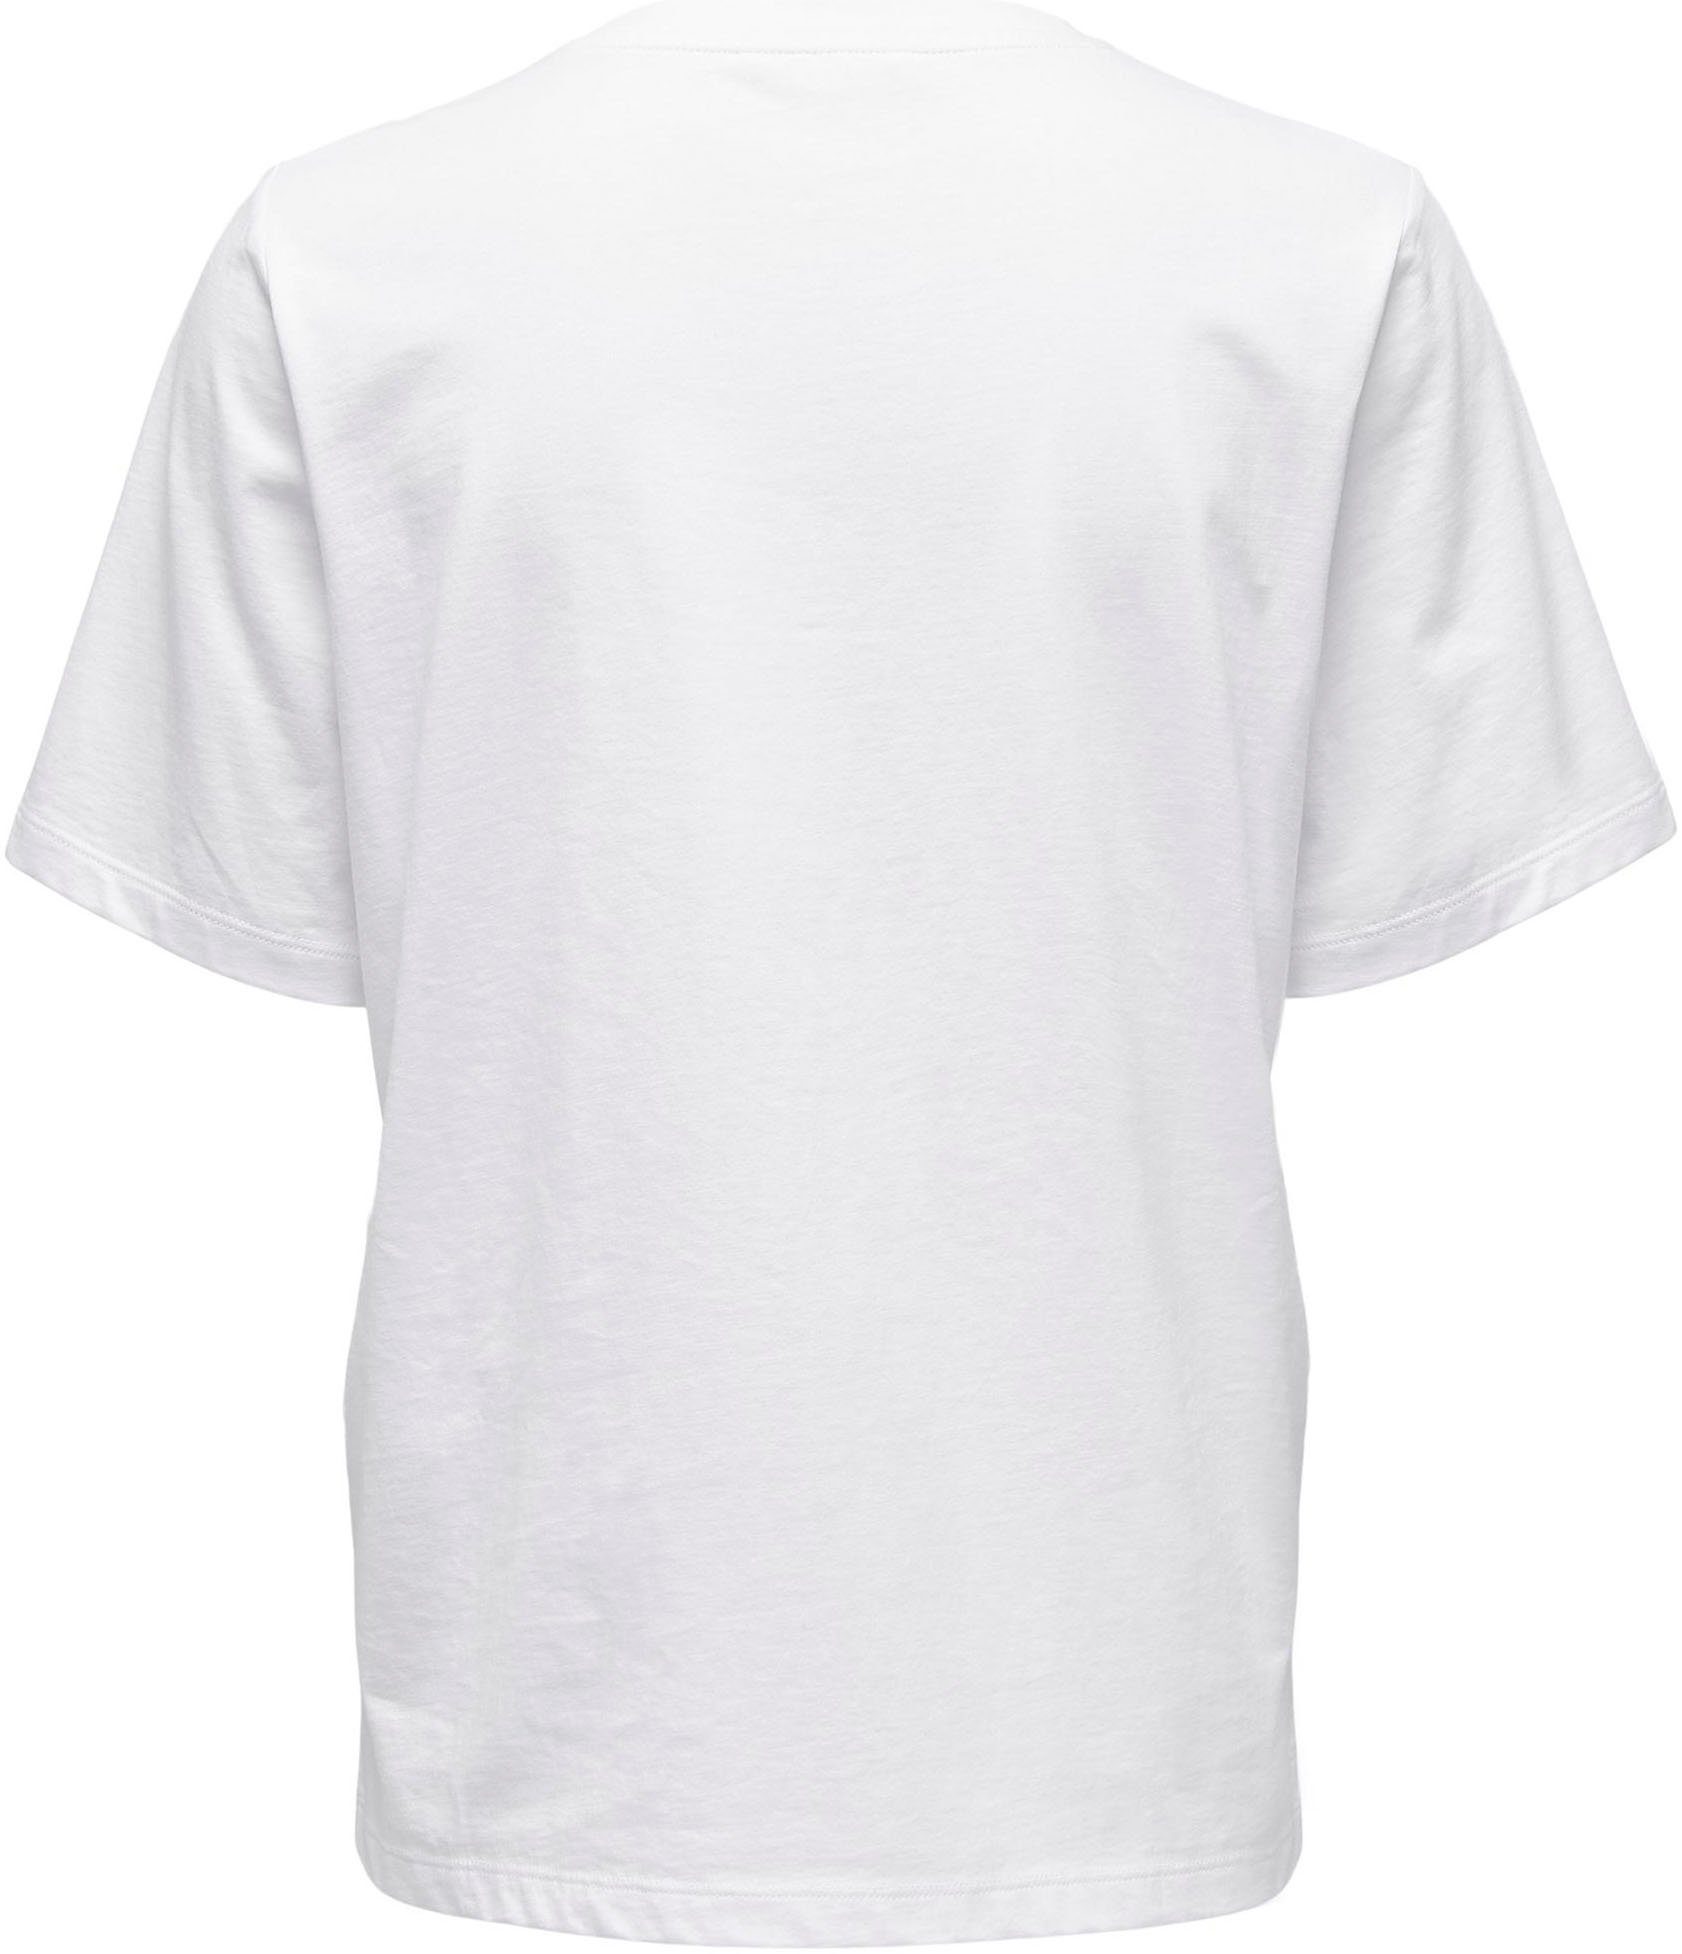 TEE Kurzarmshirt JRS S/S NOOS ONLY White ONLONLY